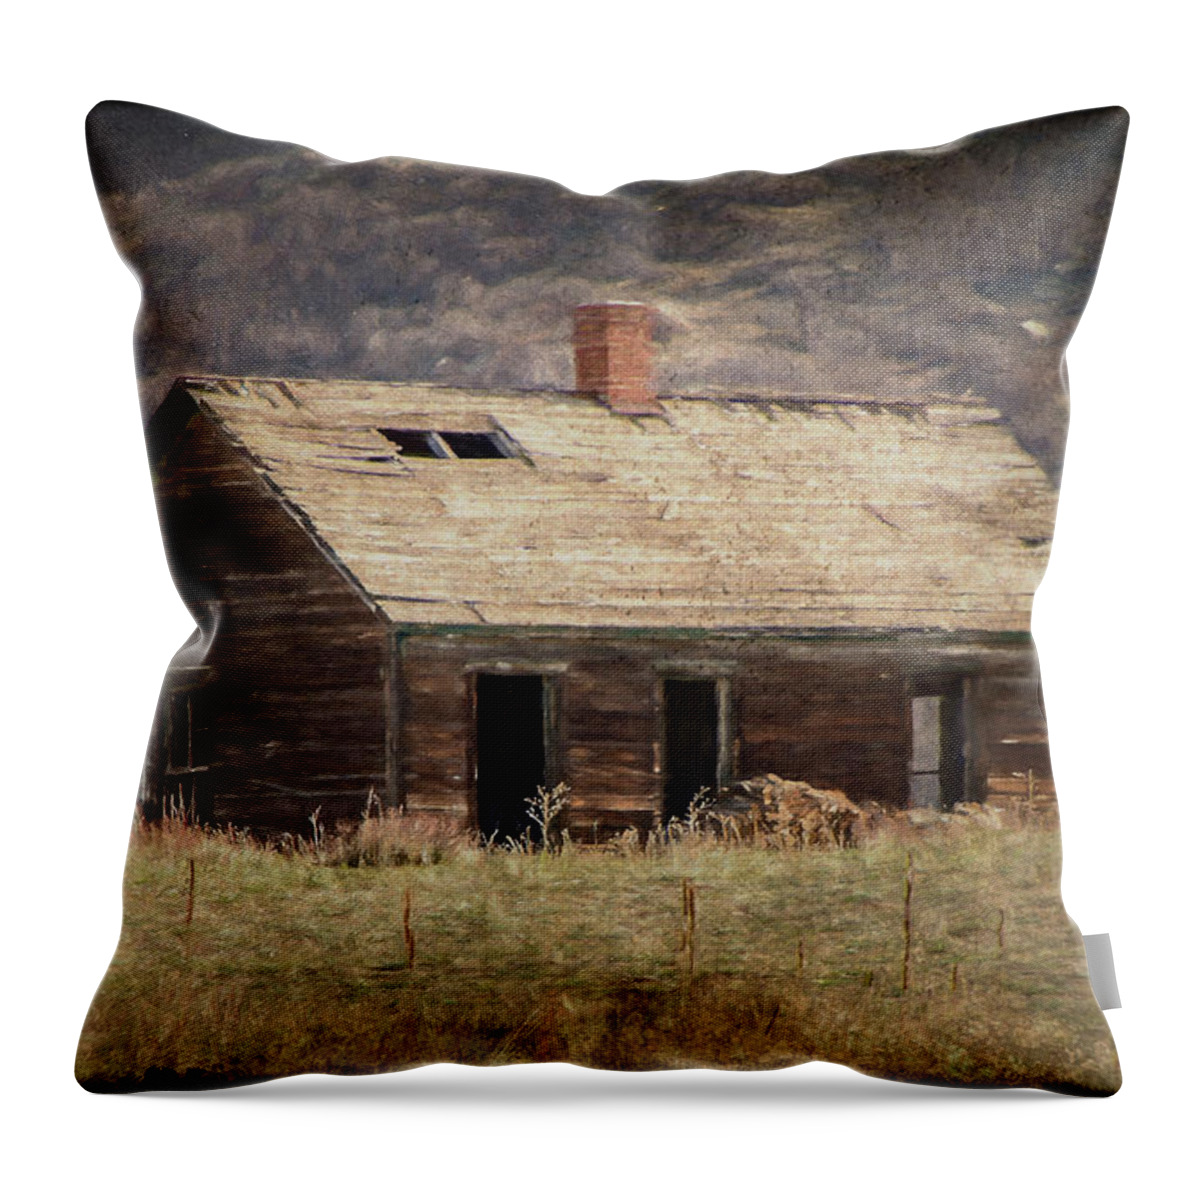 Abandon Throw Pillow featuring the photograph What's Your Story Old House? by Teresa Wilson